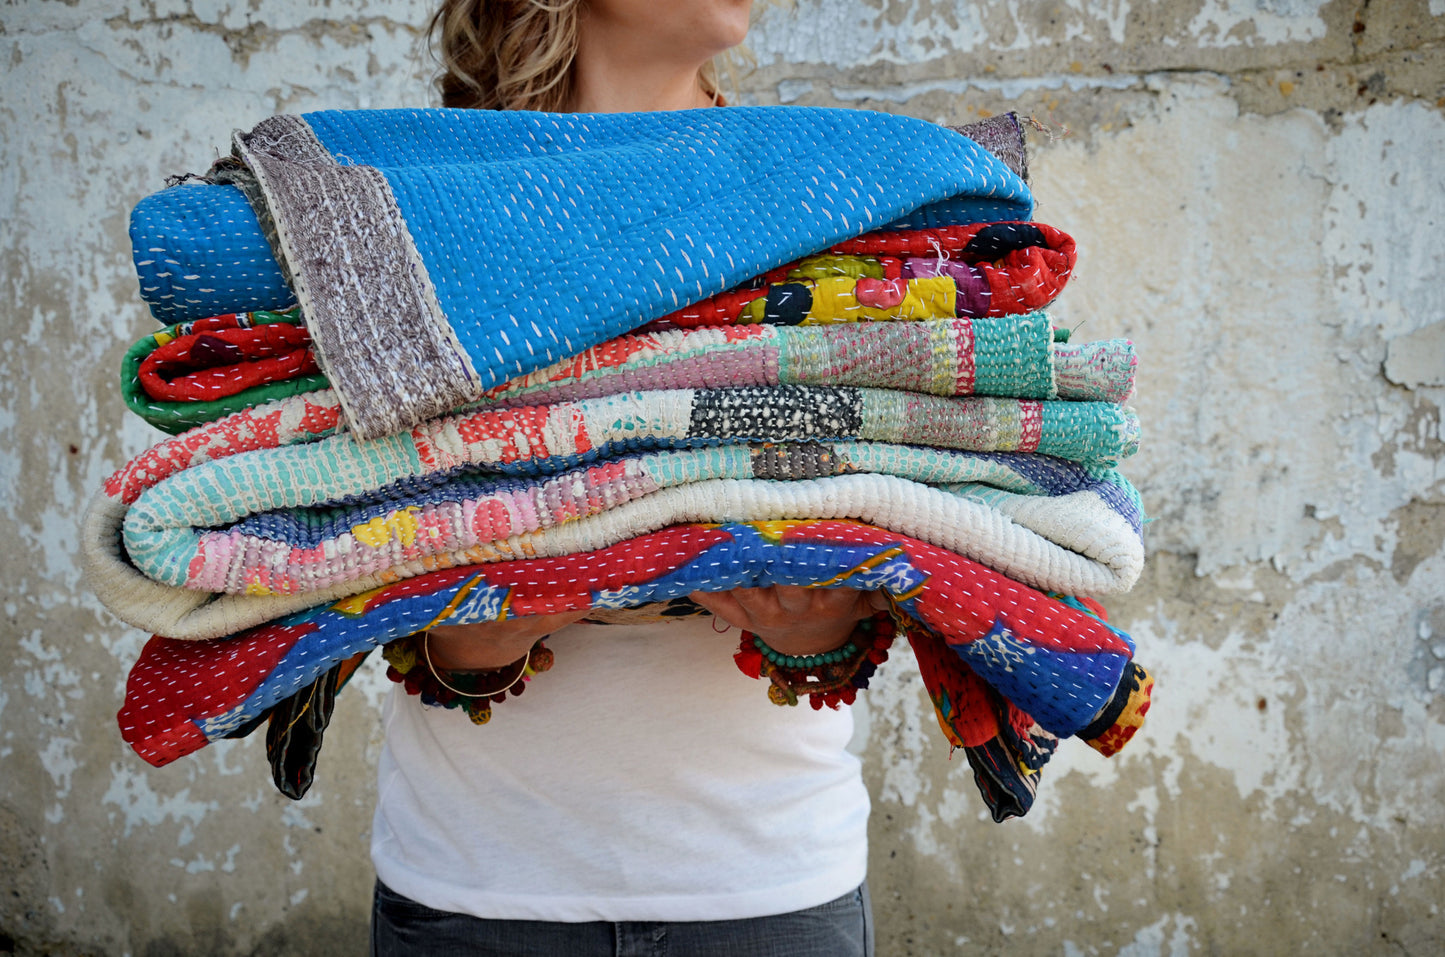 Hand Crafted Vintage Kantha Throw F